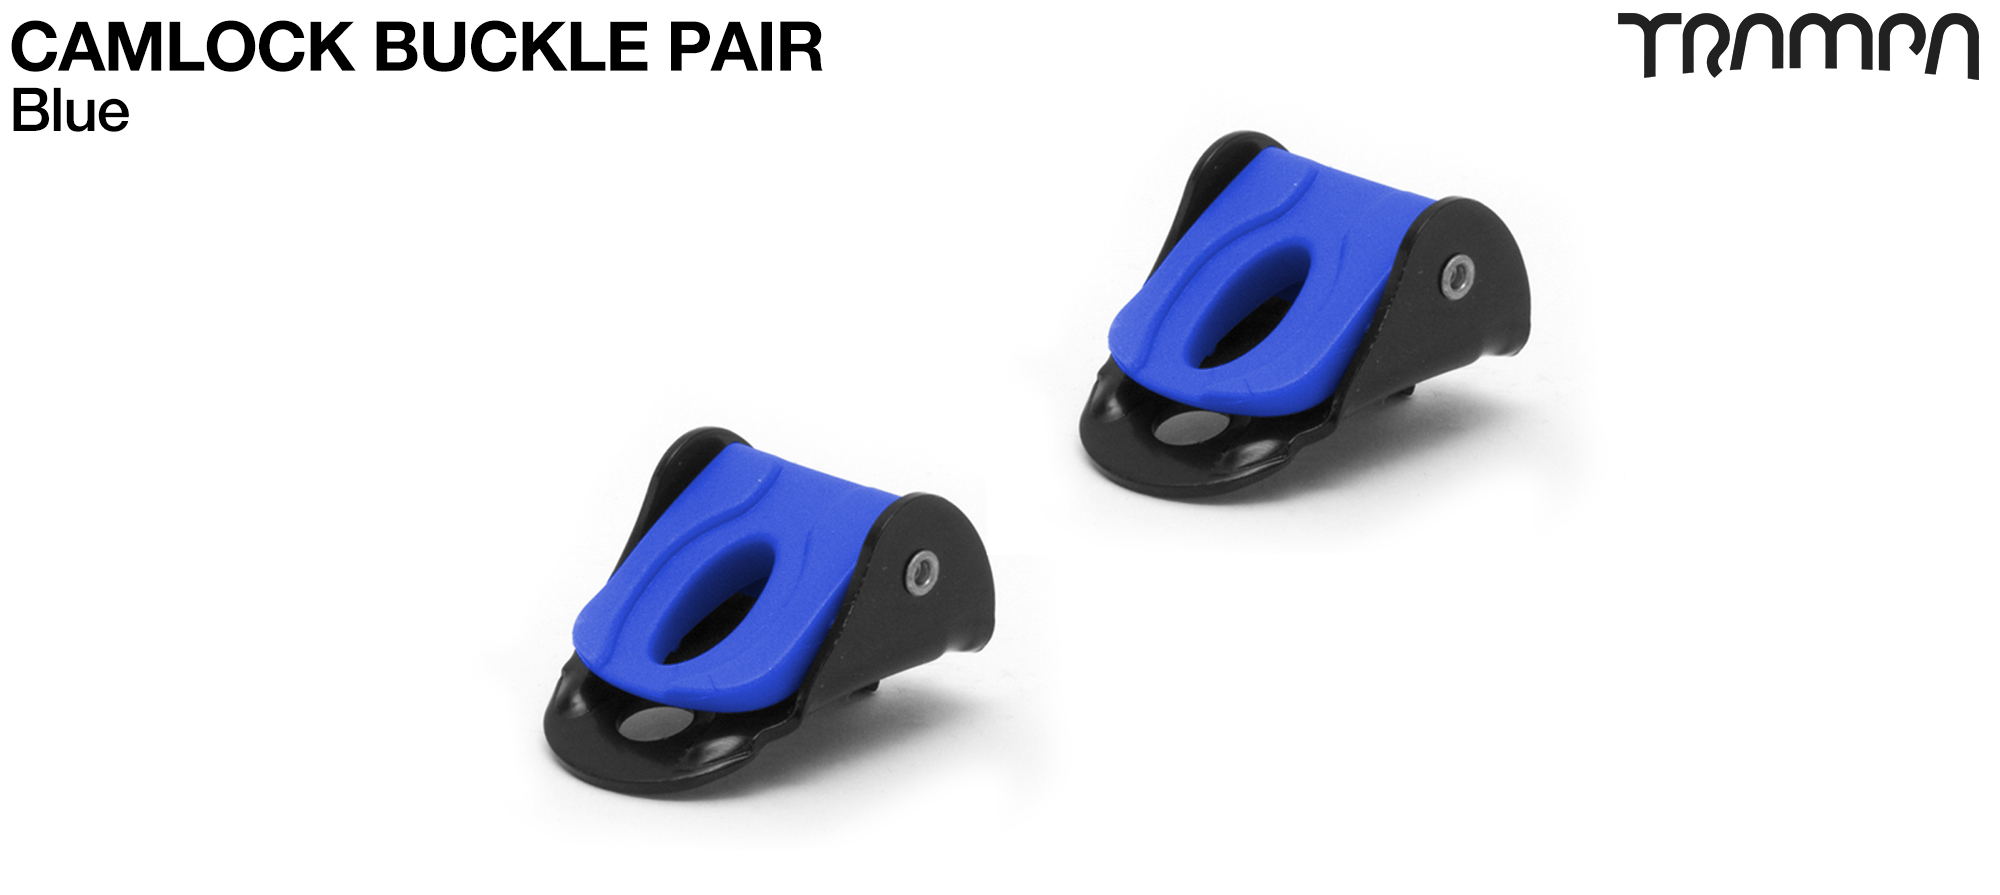 Camlock buckles for foot and heel strap Bindings - BLUE x 2